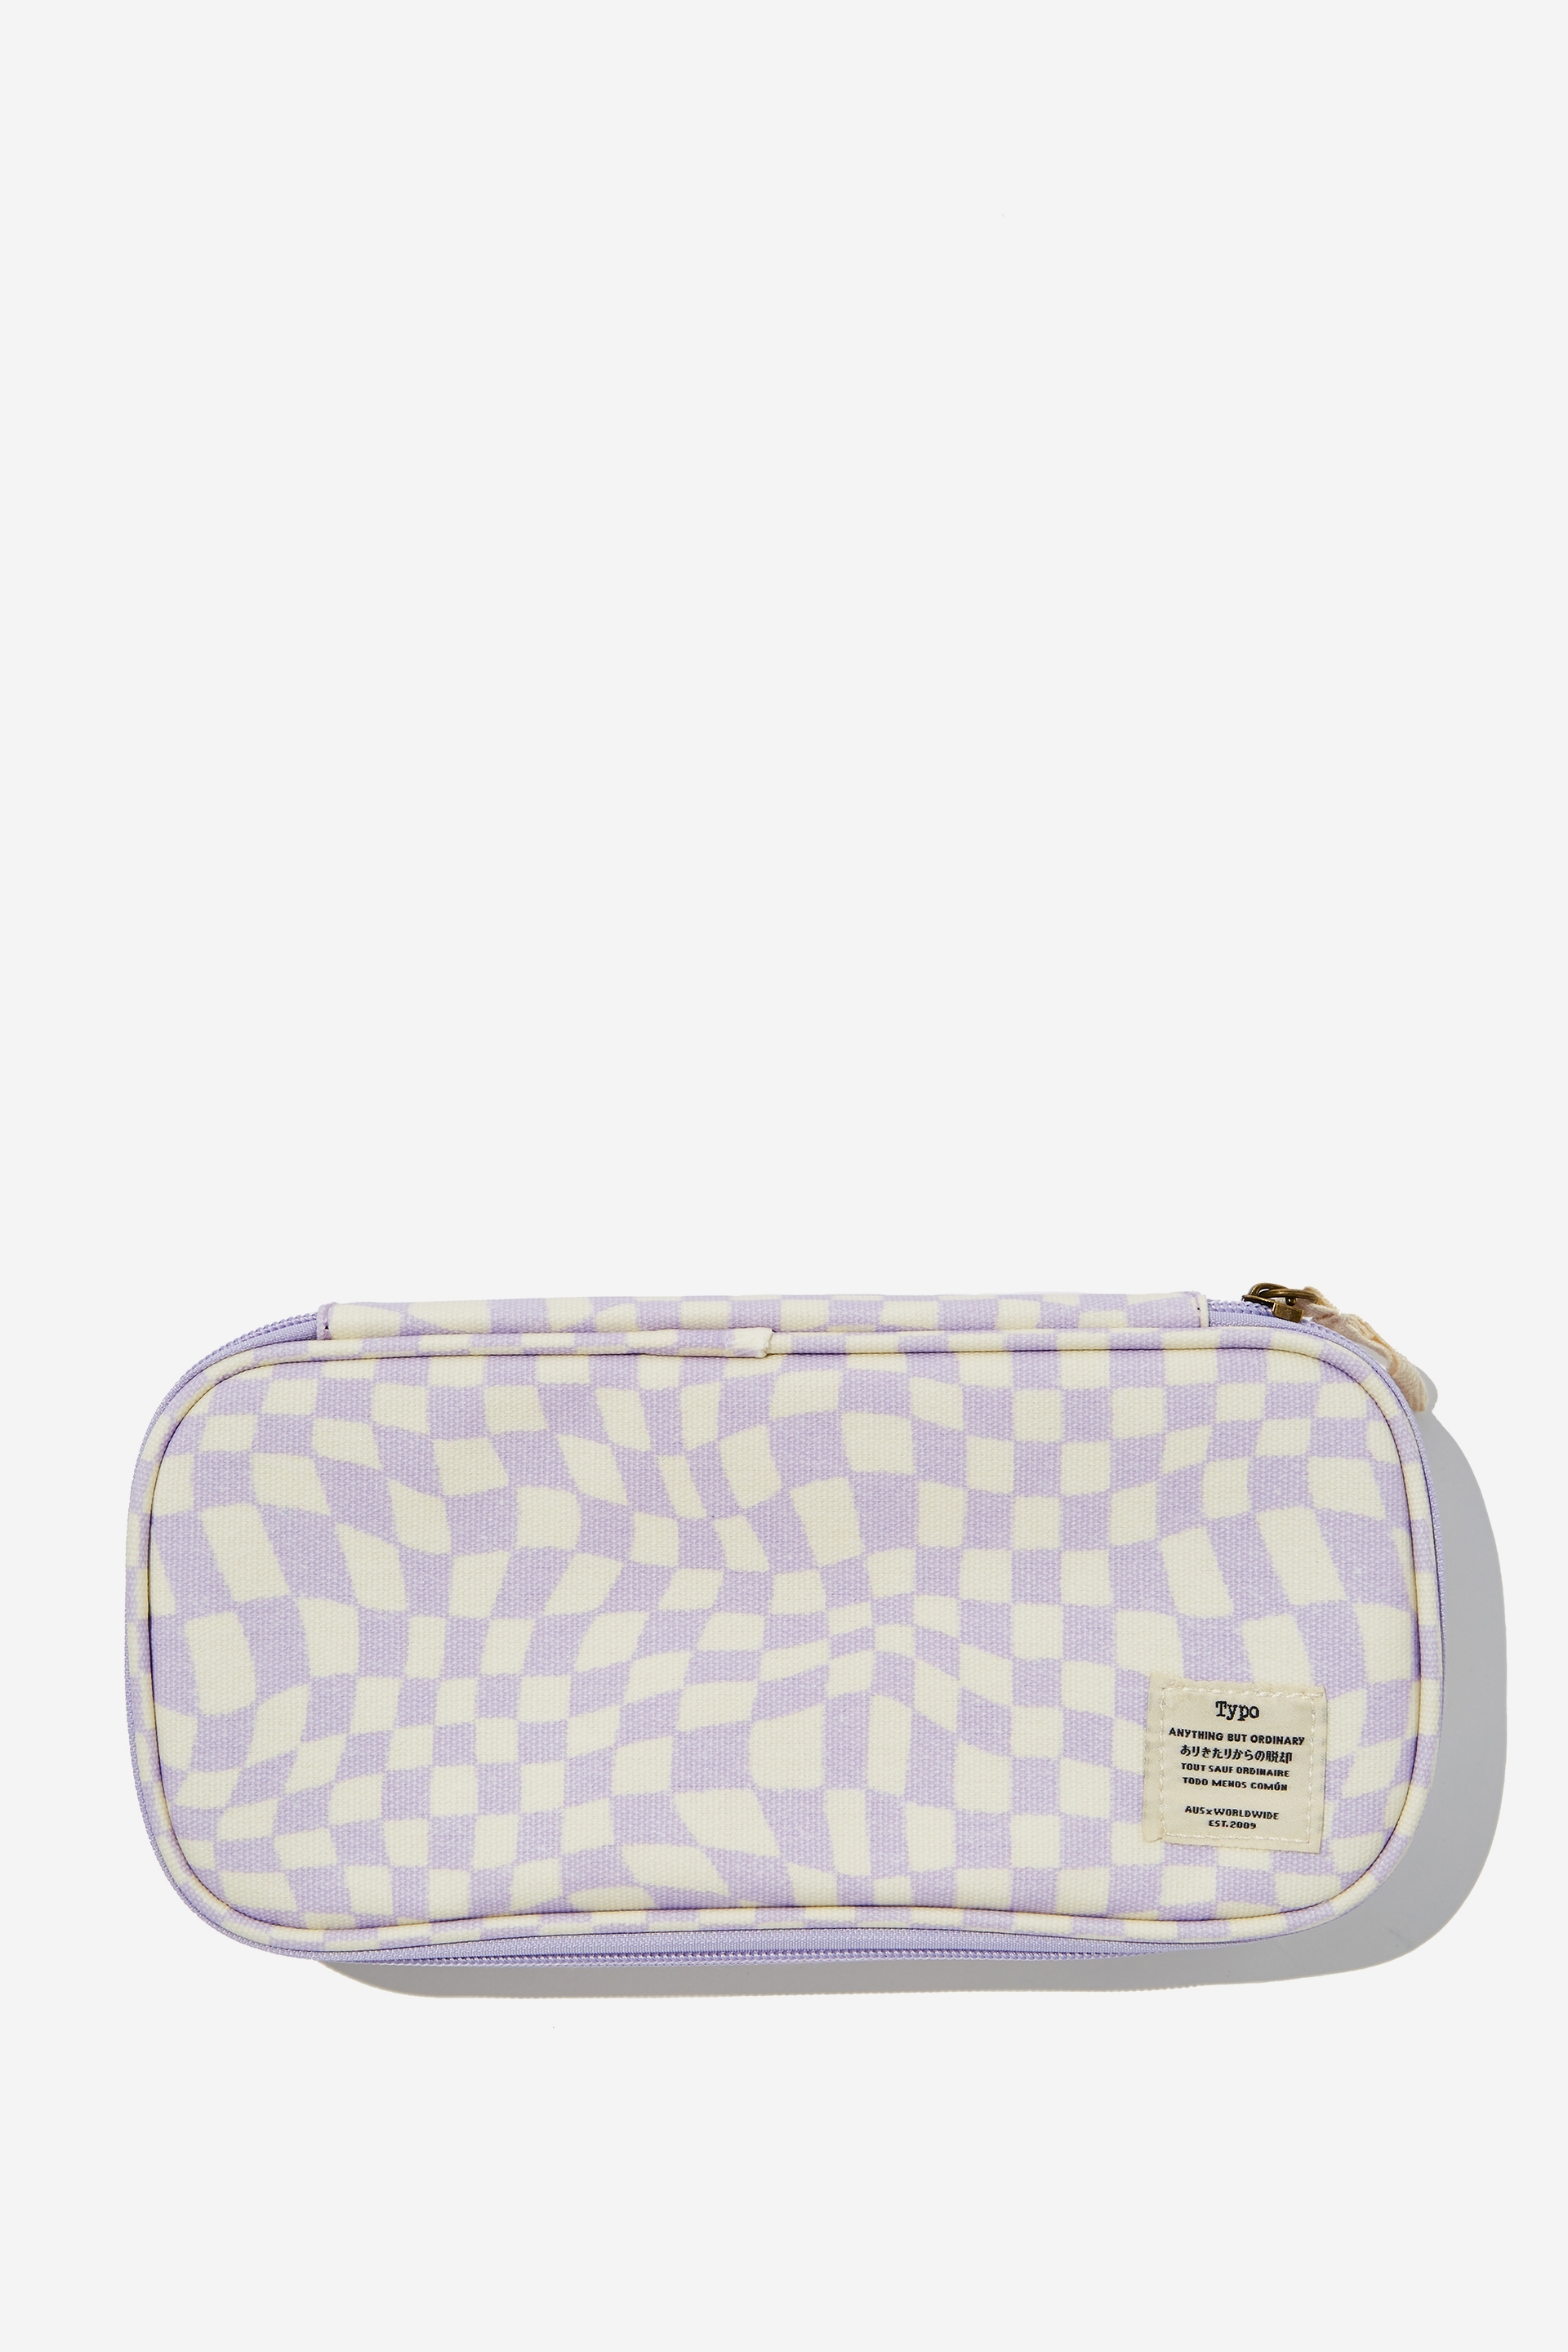 Typo - Switch It Up Gaming Case - Warp checkerboard lilac